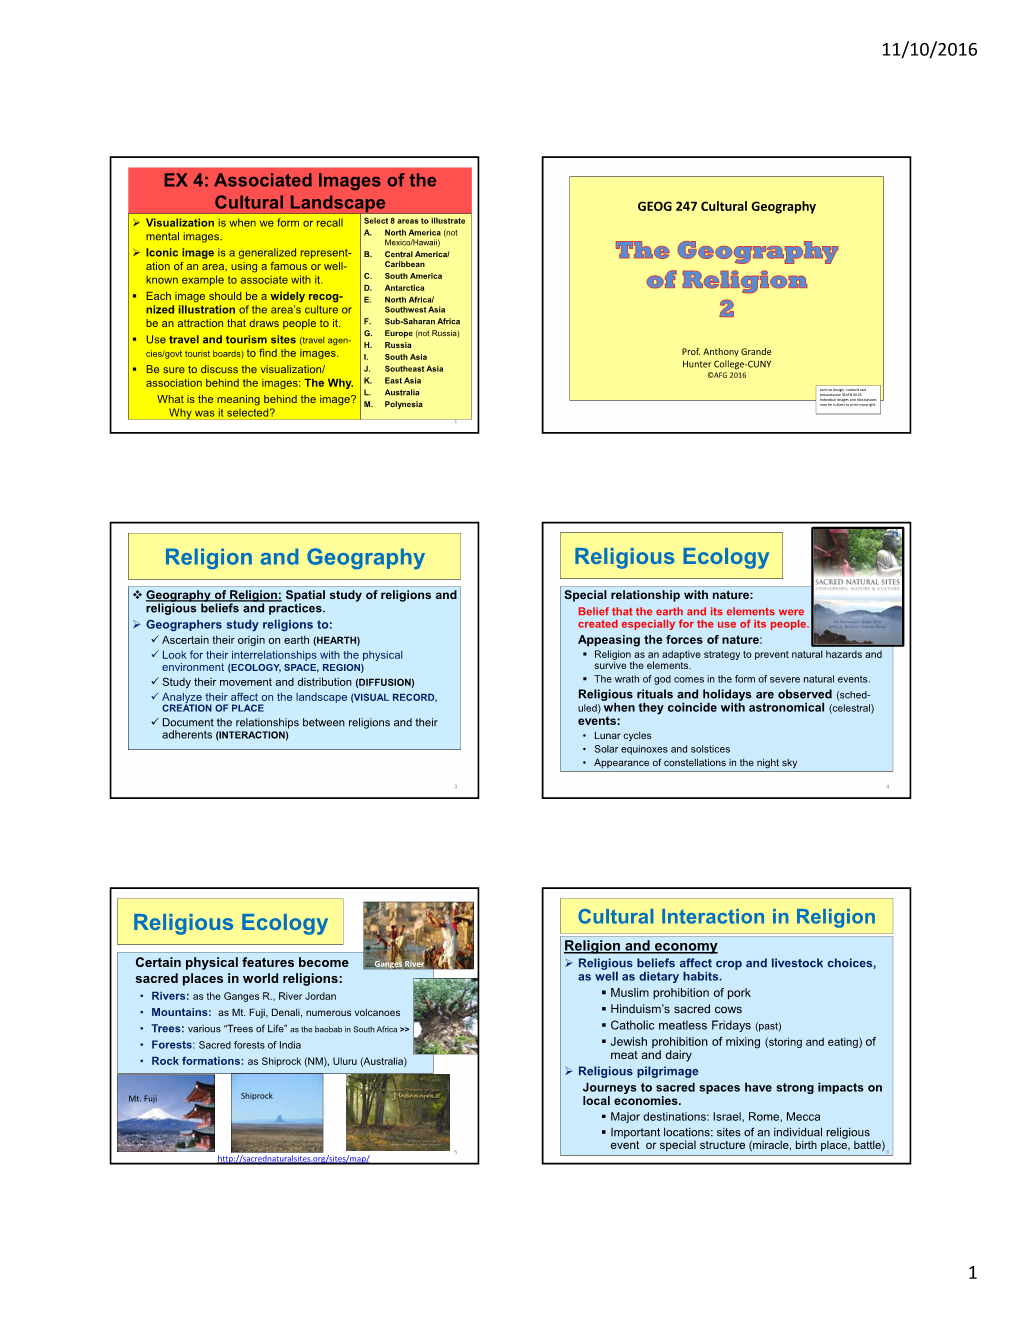 Religion and Geography Religious Ecology Religious Ecology